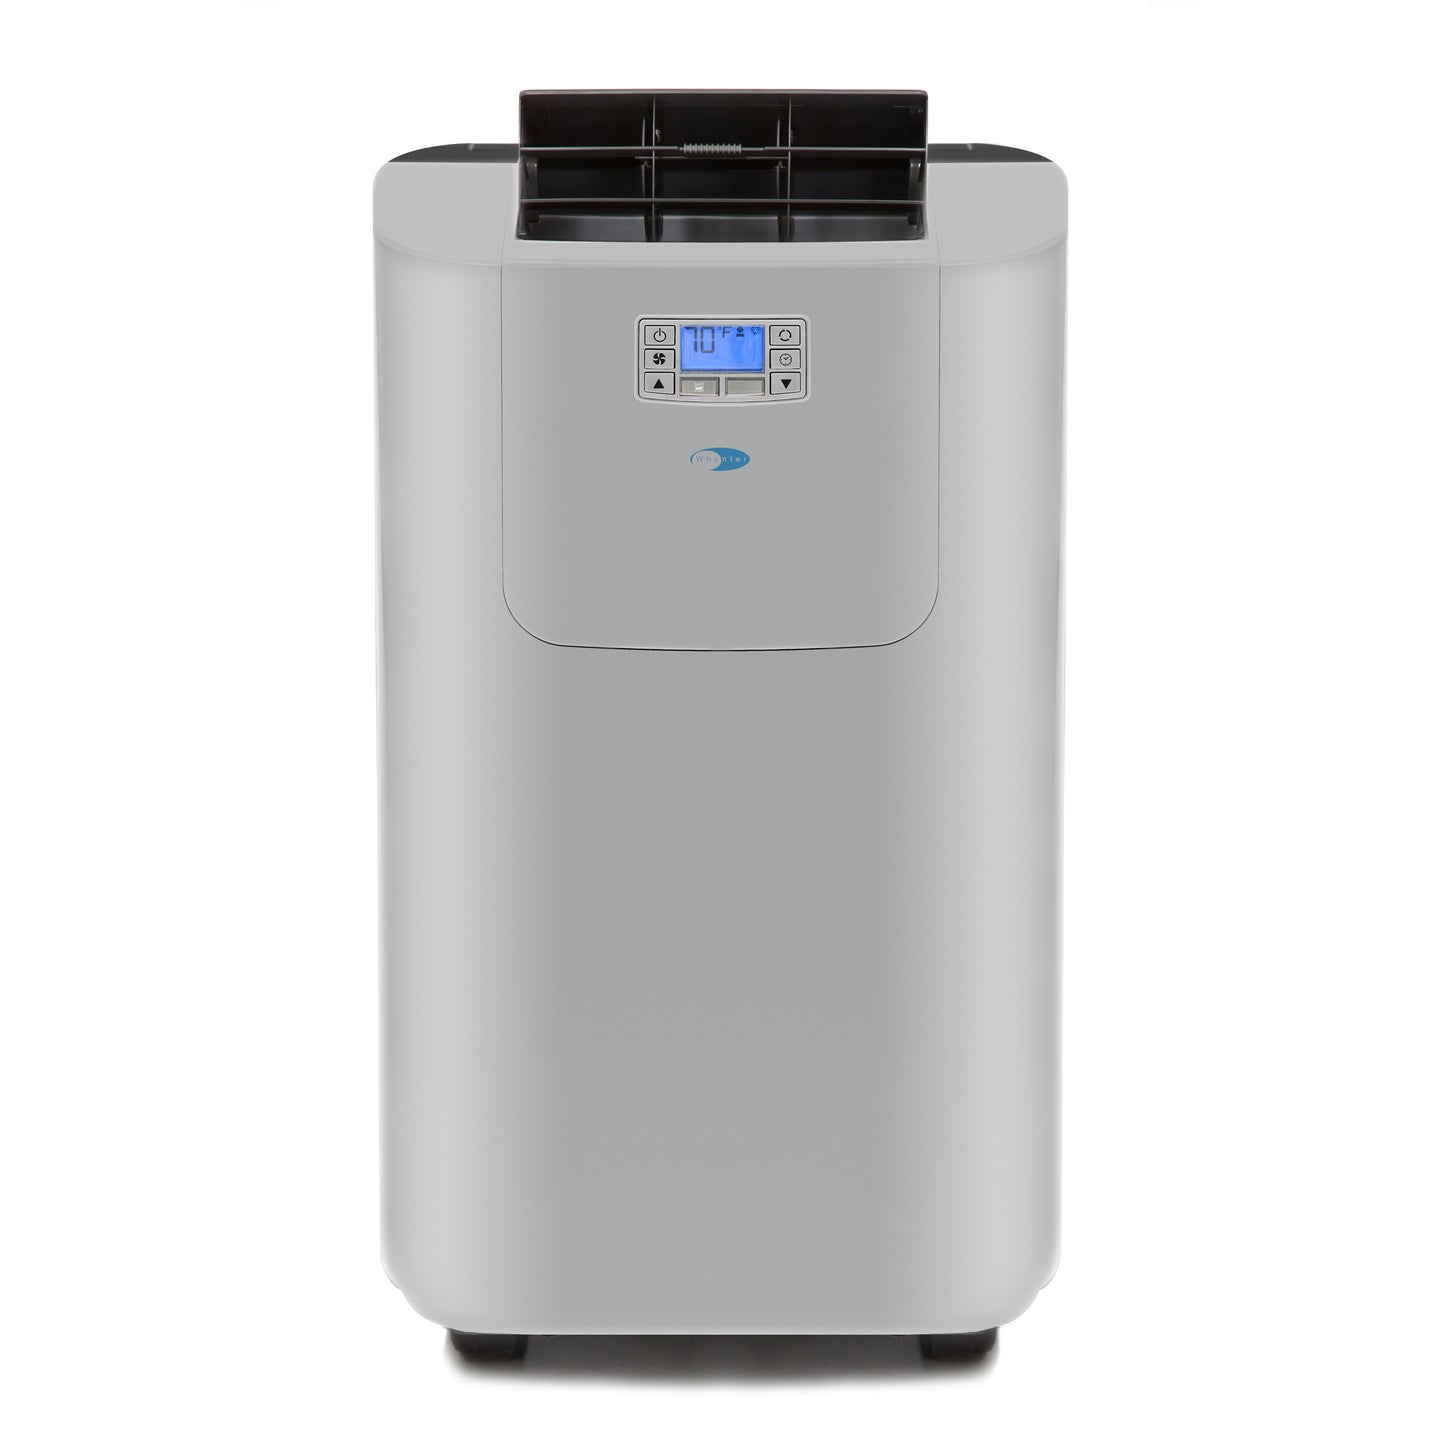 Buy a Whynter Elite 12000 BTU 400 sq ft Dual Hose Digital Portable Air Conditioner with Heat and Drain Pump by Chilled Beverages